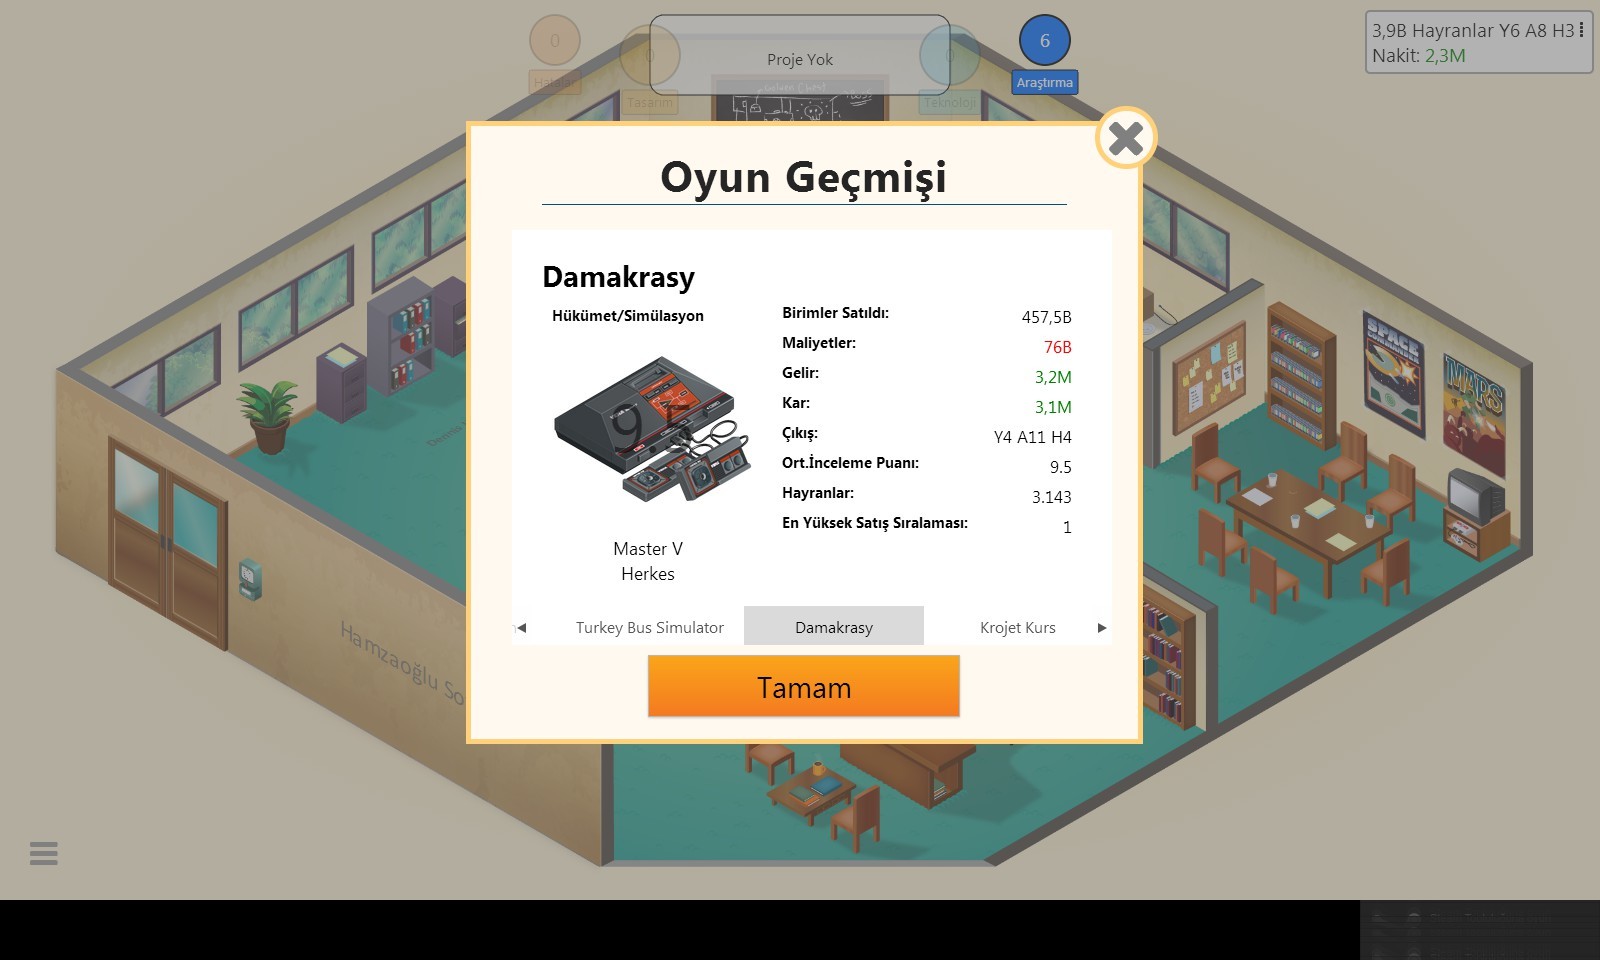 tycoon io games online free no download